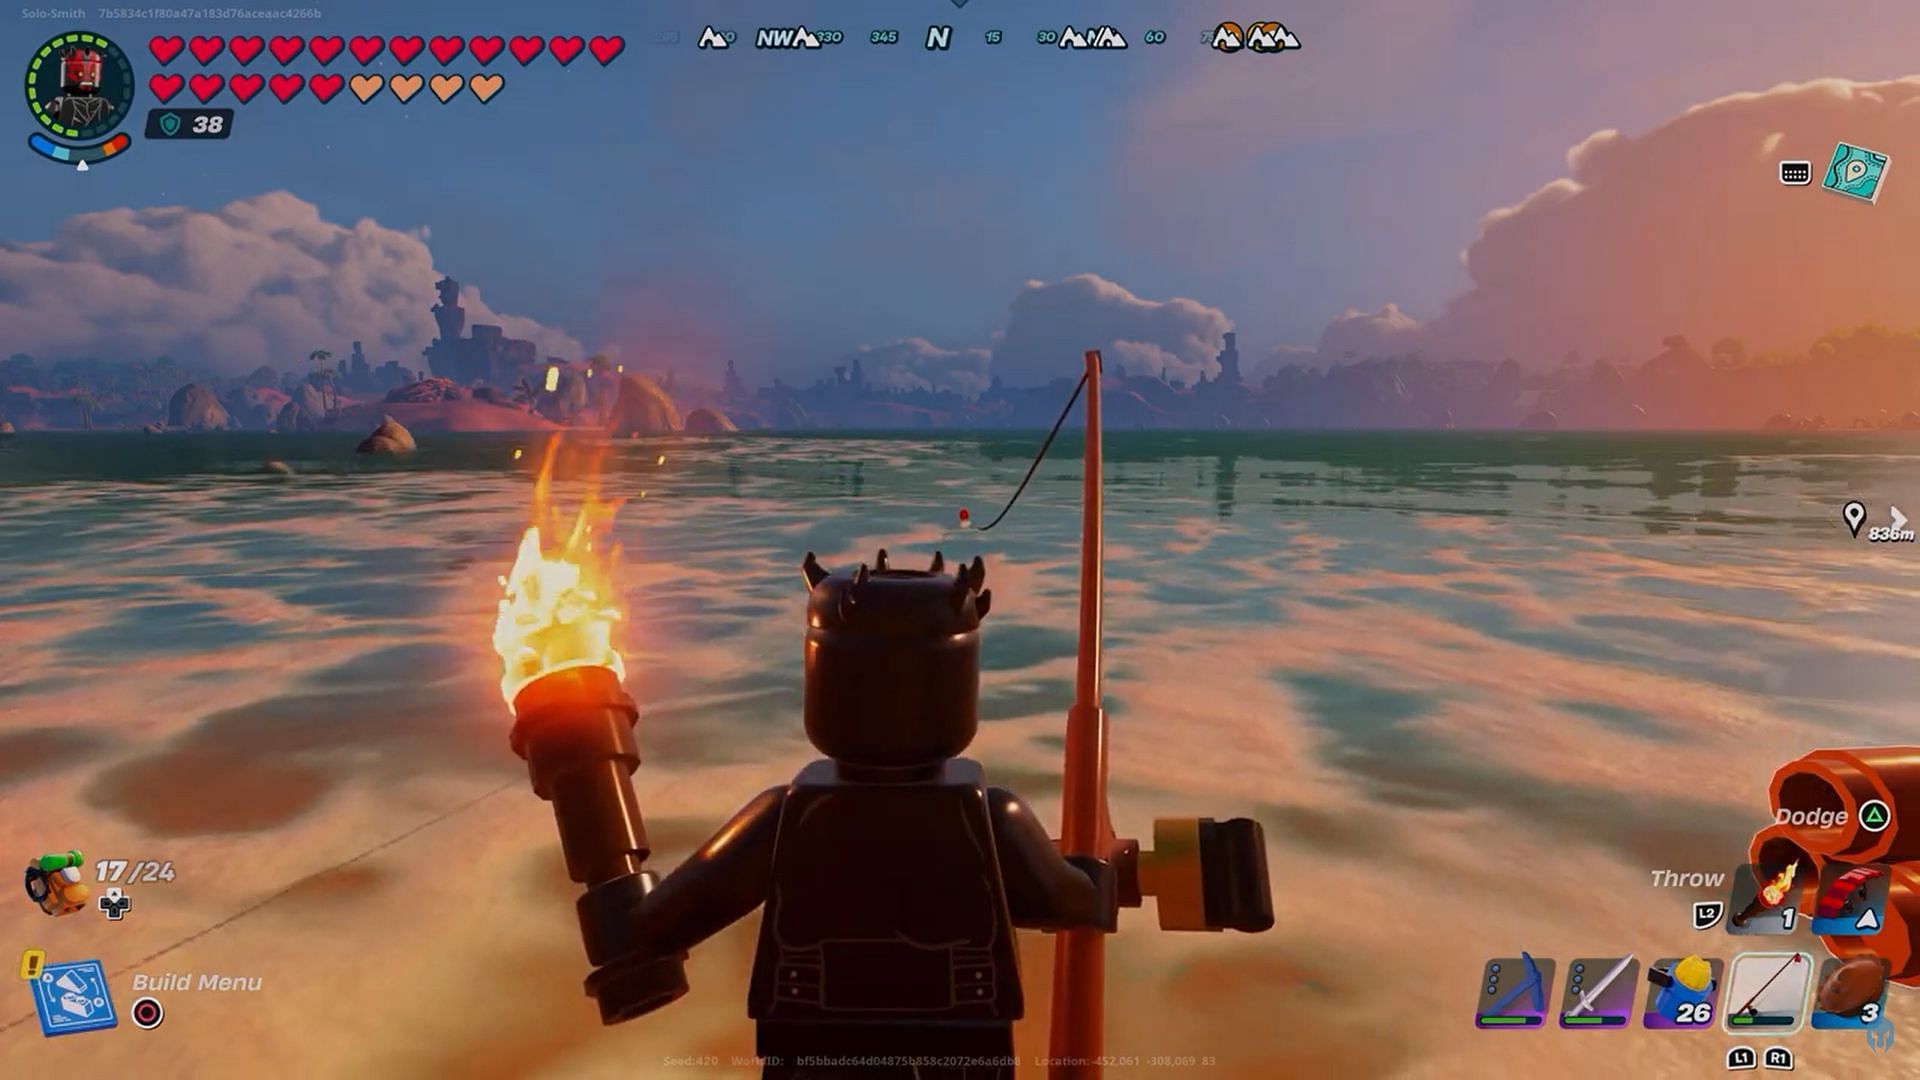 Fishing in LEGO Fortnite (Image via Gamers Heroes on Reddit and Epic Games)